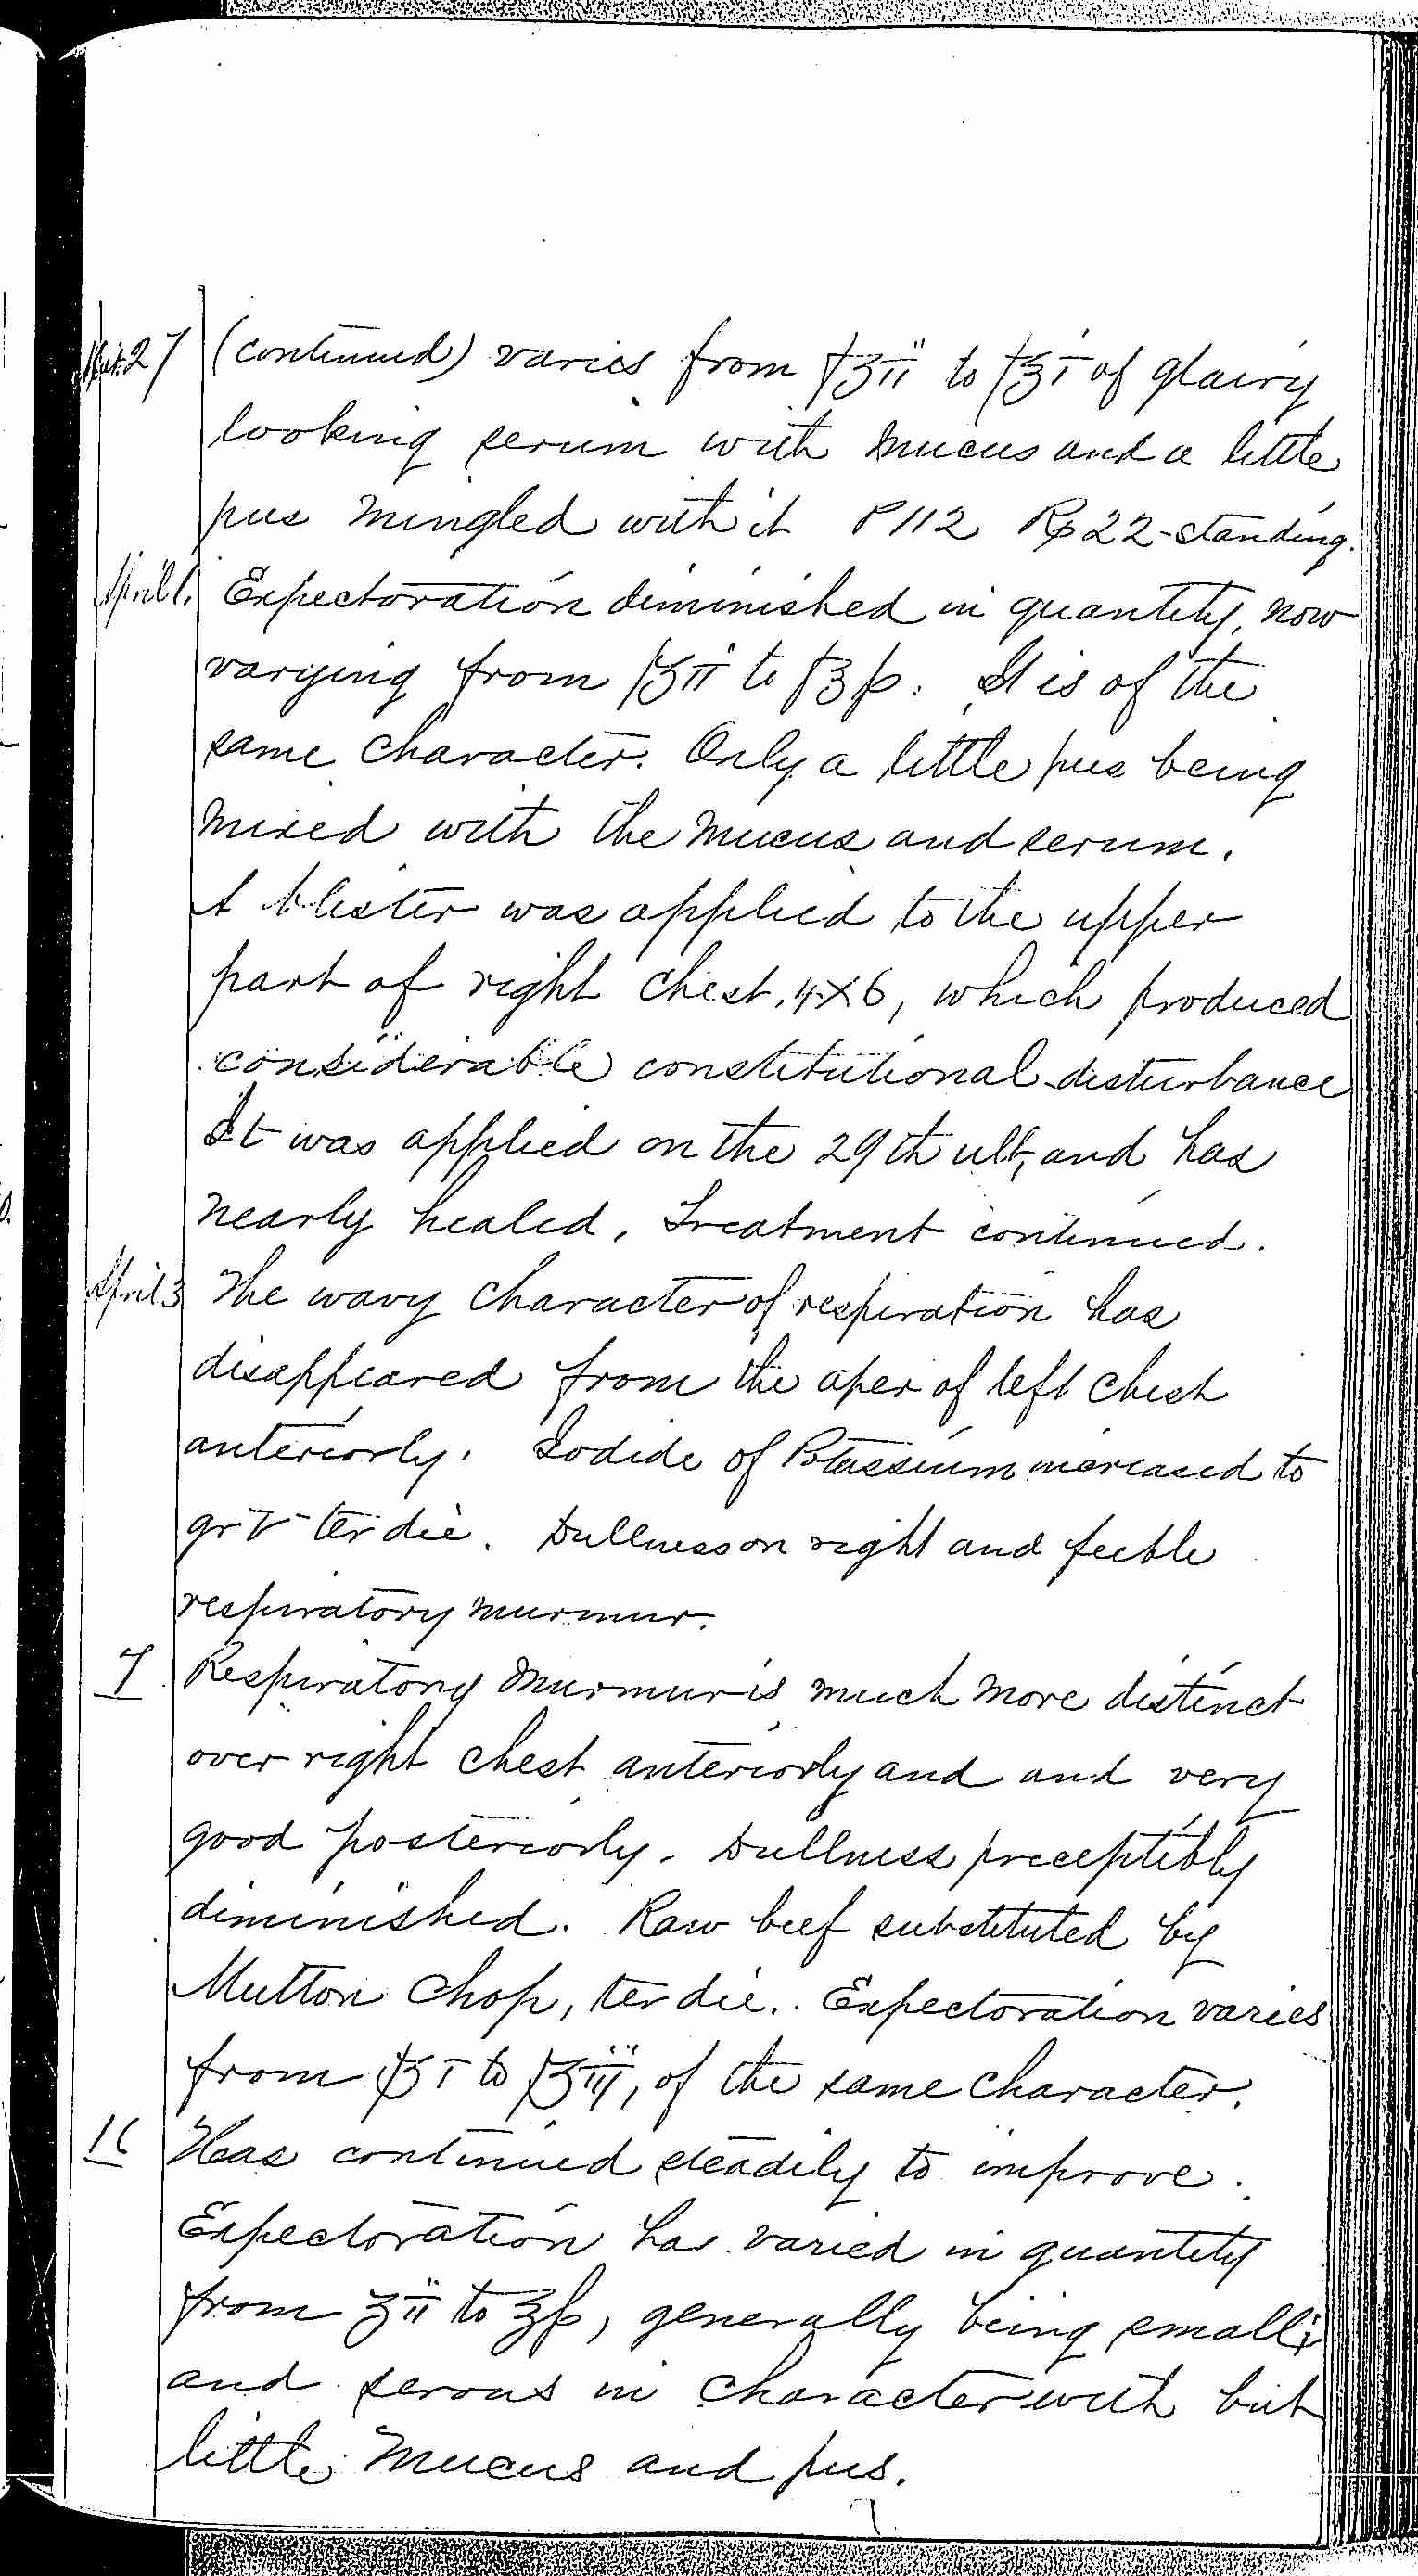 Entry for Peter C. Cheeks (page 11 of 16) in the log Hospital Tickets and Case Papers - Naval Hospital - Washington, D.C. - 1868-69